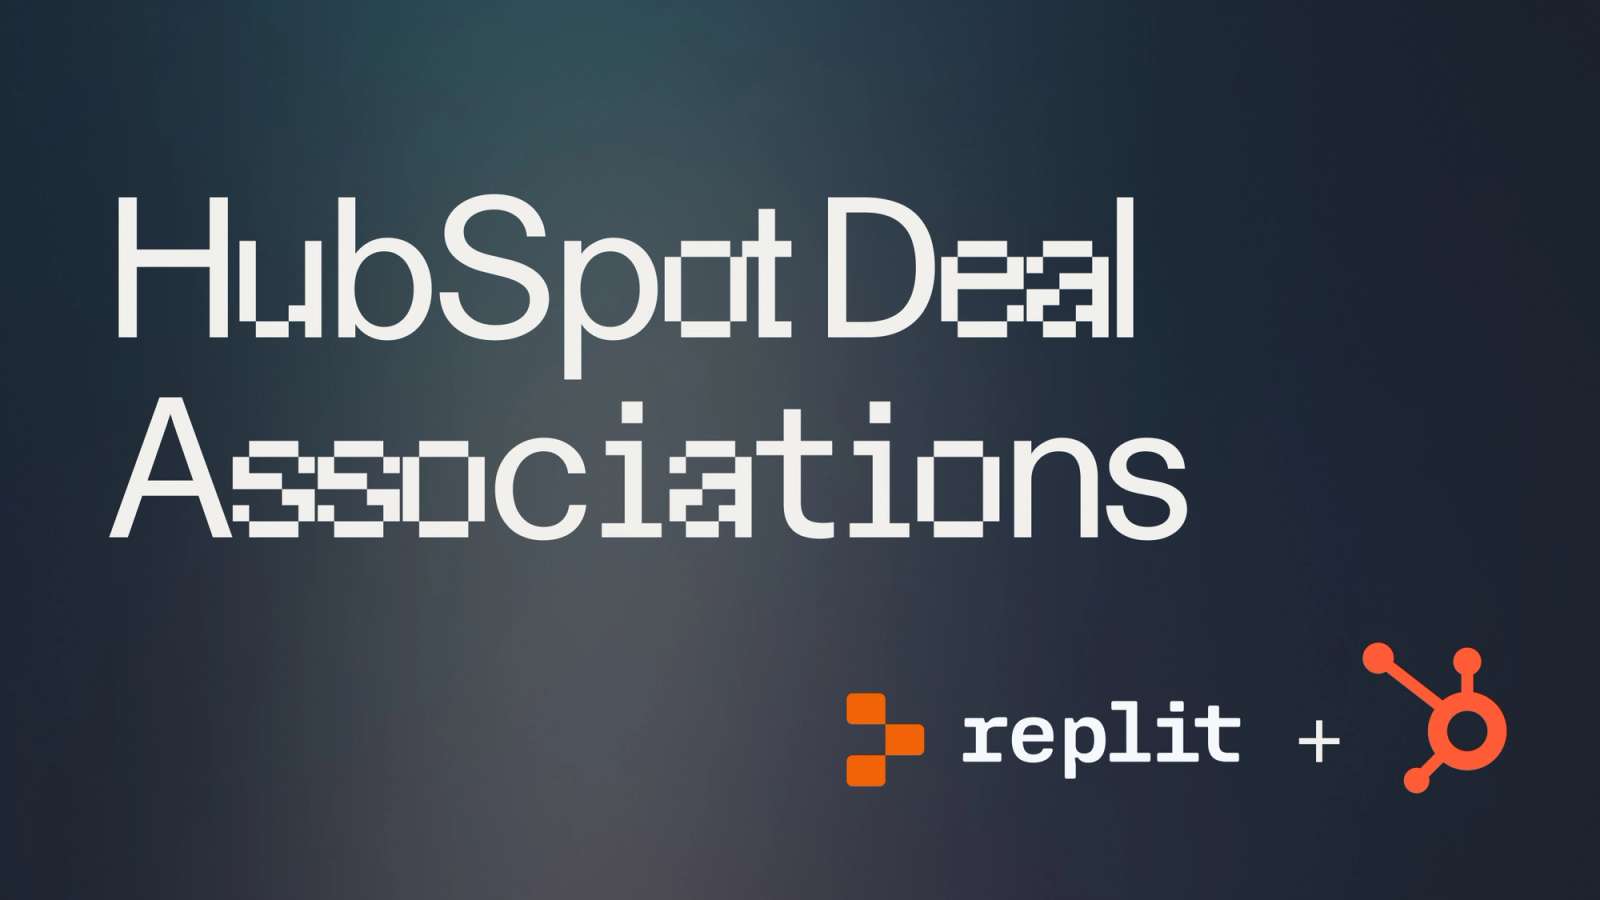 "HubSpot Deal Assoications" title with Replit and HubSpot logos in bottom-right corner